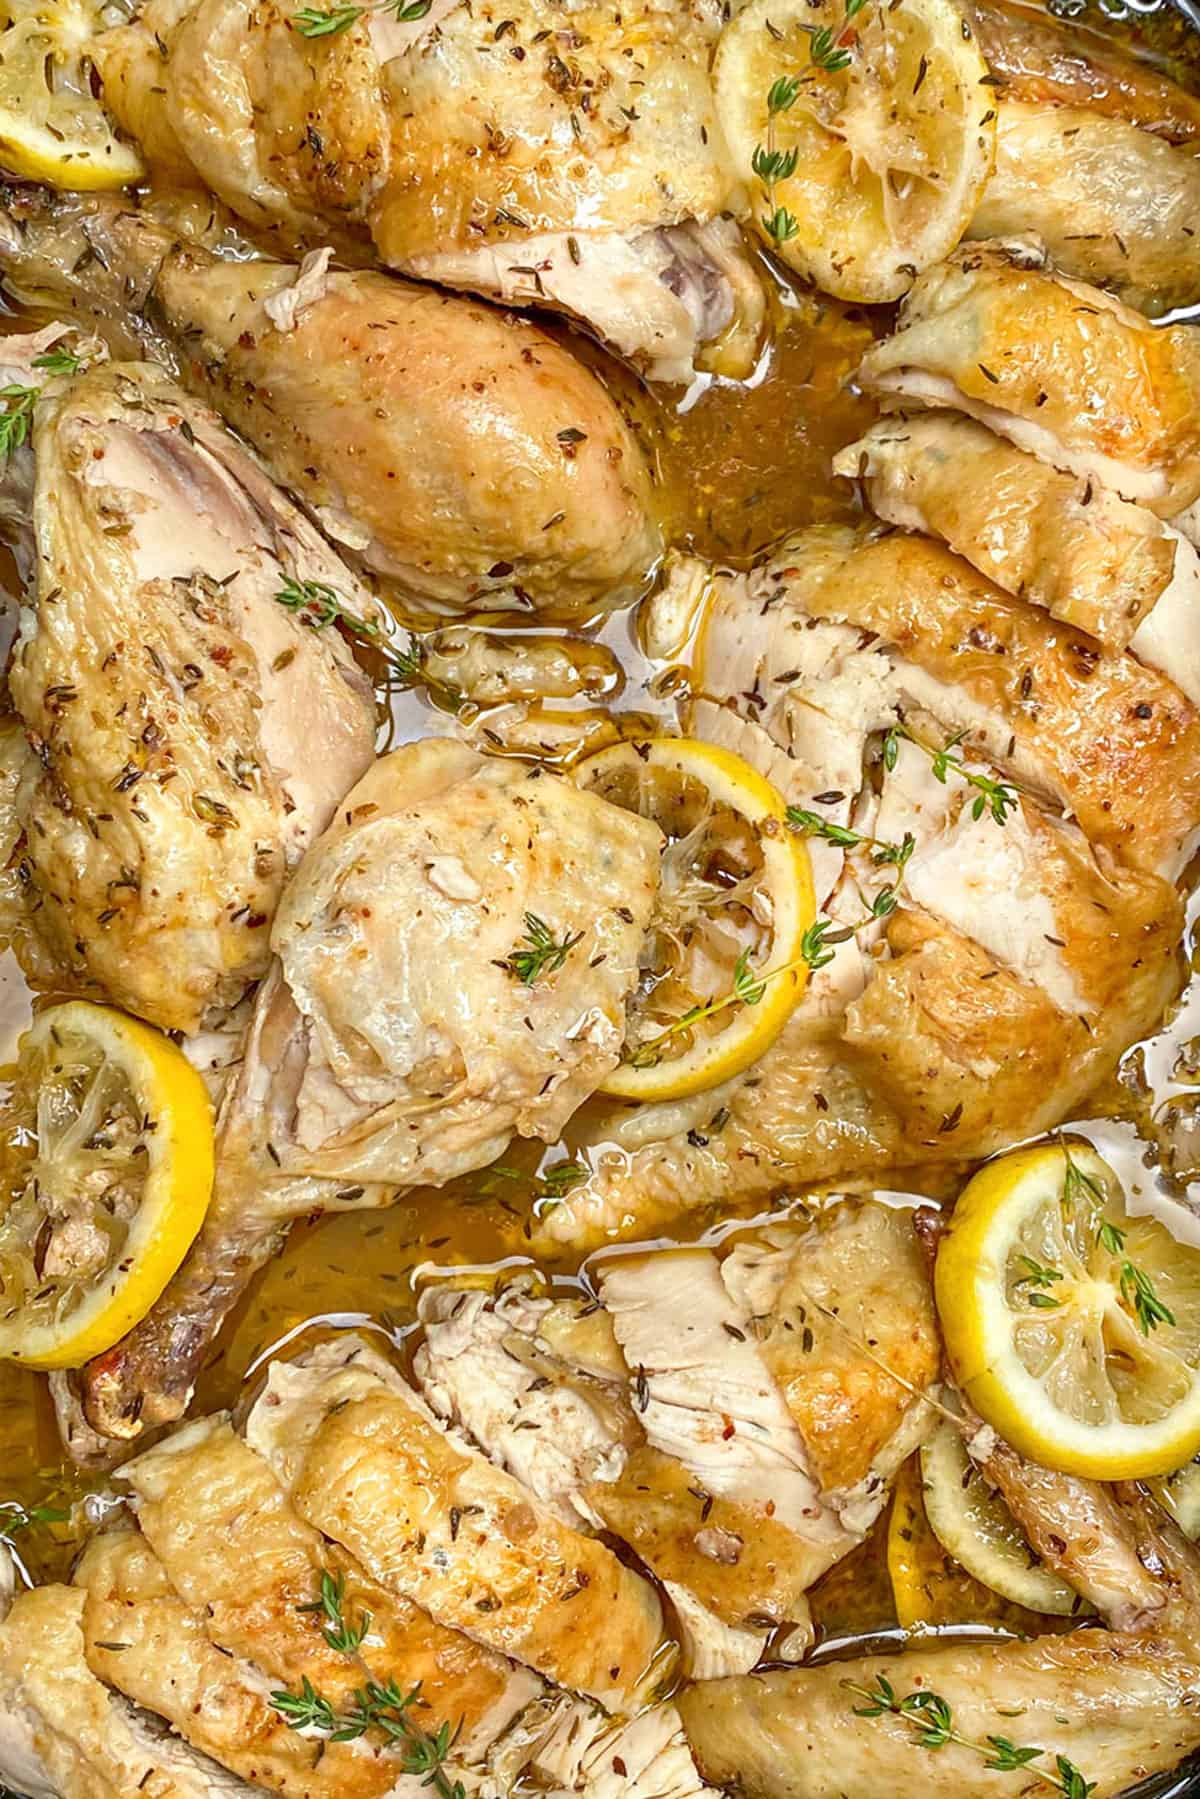 A whole chicken cut up into serving pieces, nestled into pan juices with sliced lemons strewn around